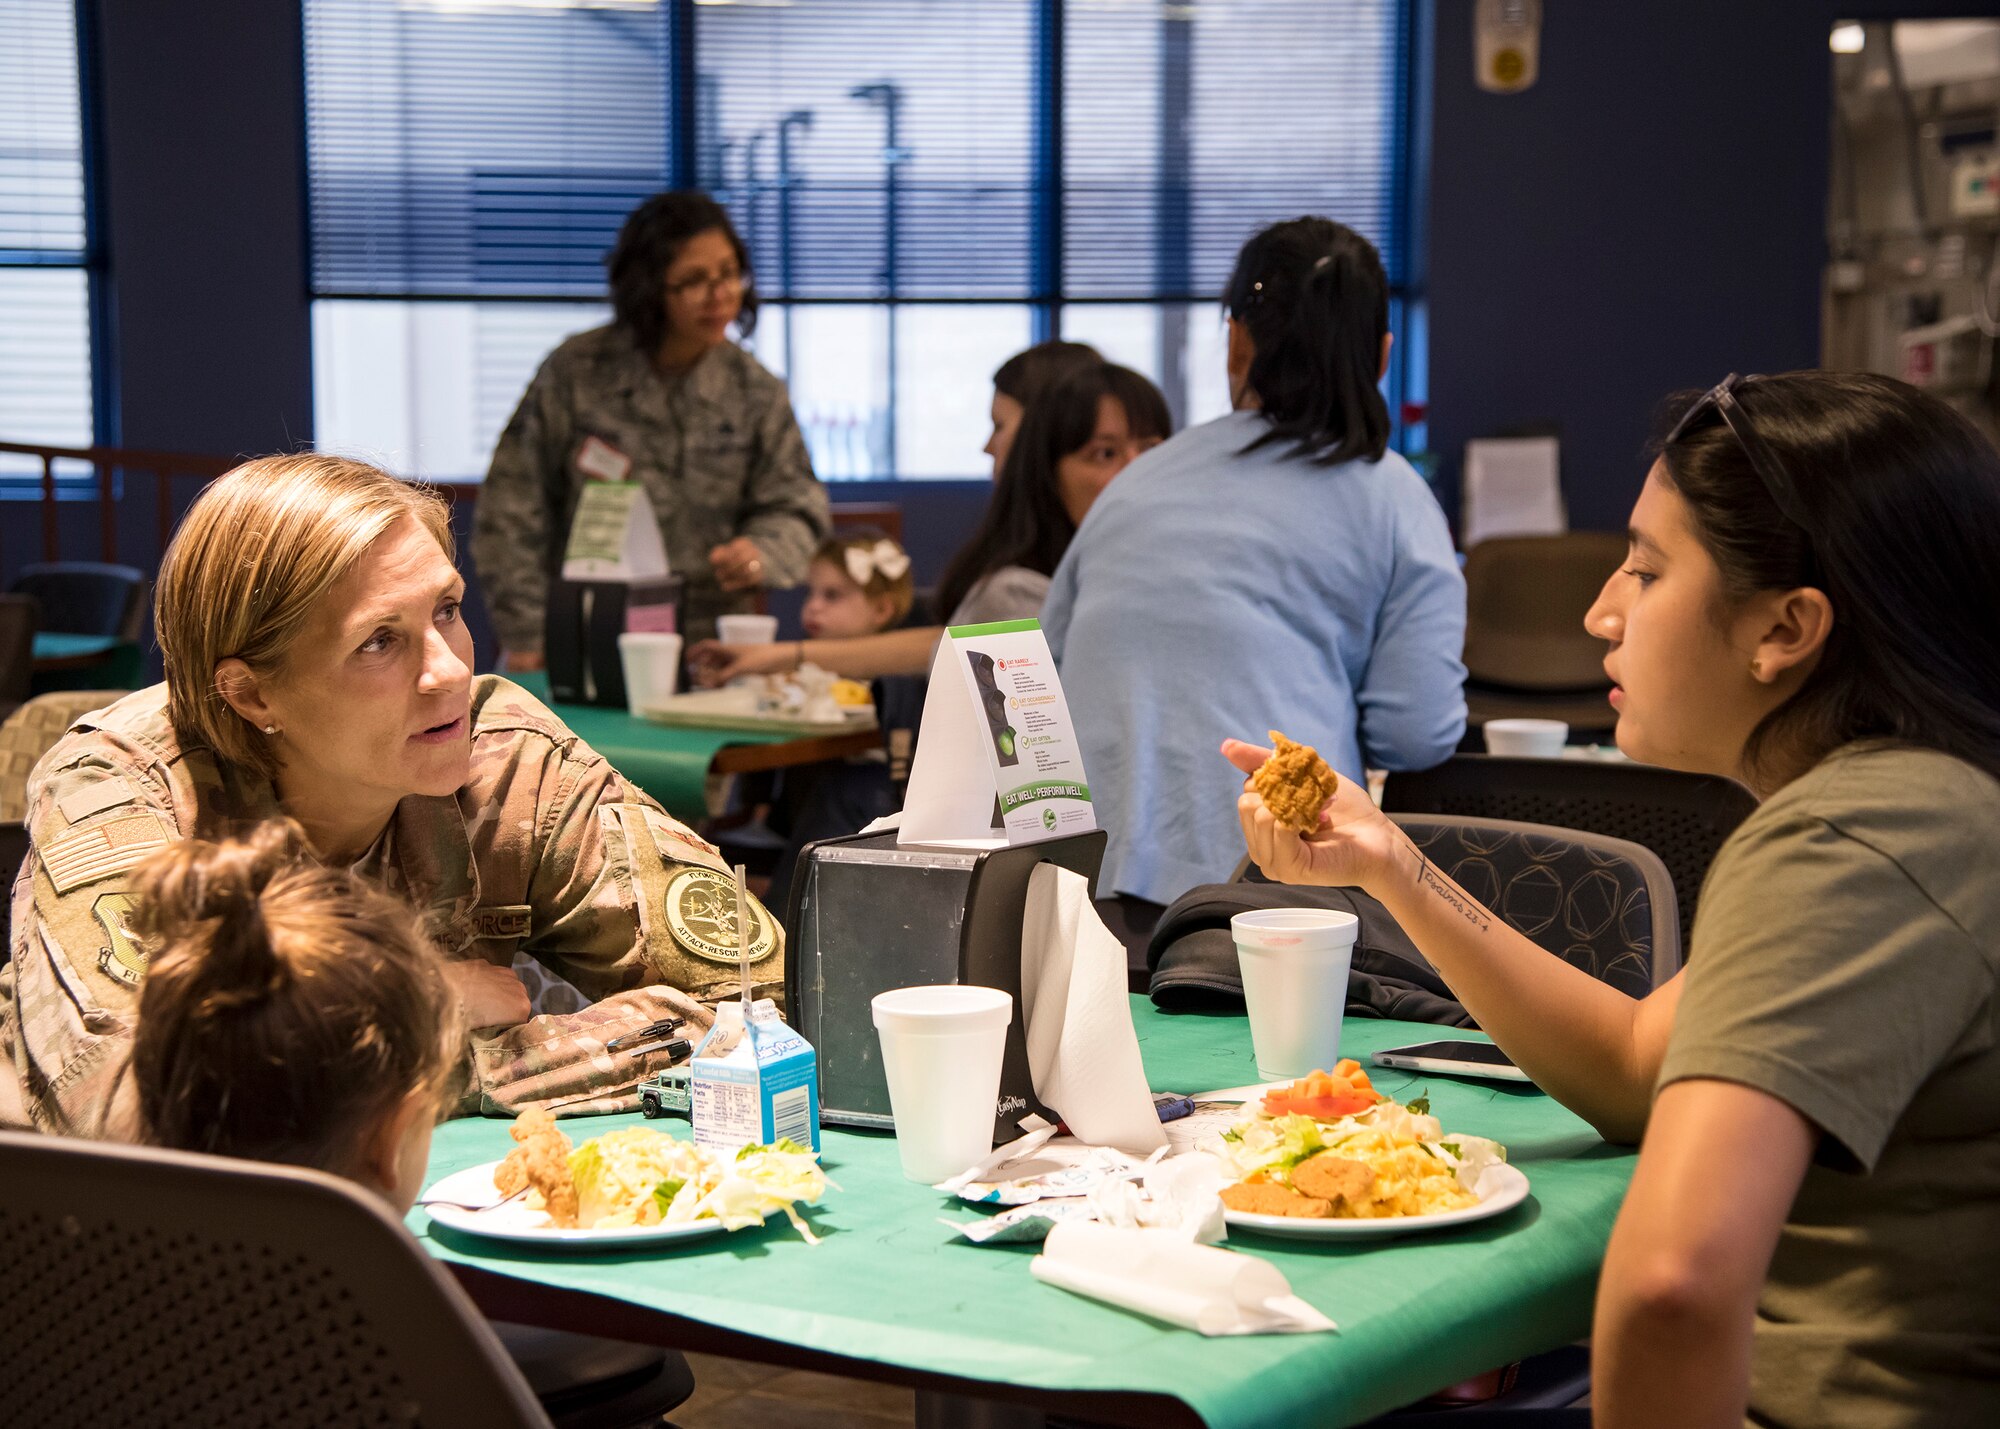 Col. Jennifer Short, 23d Wing commander, speaks with a participant during a deployed spouse dinner, March 19, 2019, at Moody Air Force Base, Ga. The mission’s success depends on resilient Airmen and families, who are prepared to make sacrifices with the support of their fellow Airmen, local communities and leadership. (U.S. Air Force photo by Airman 1st Class Eugene Oliver)